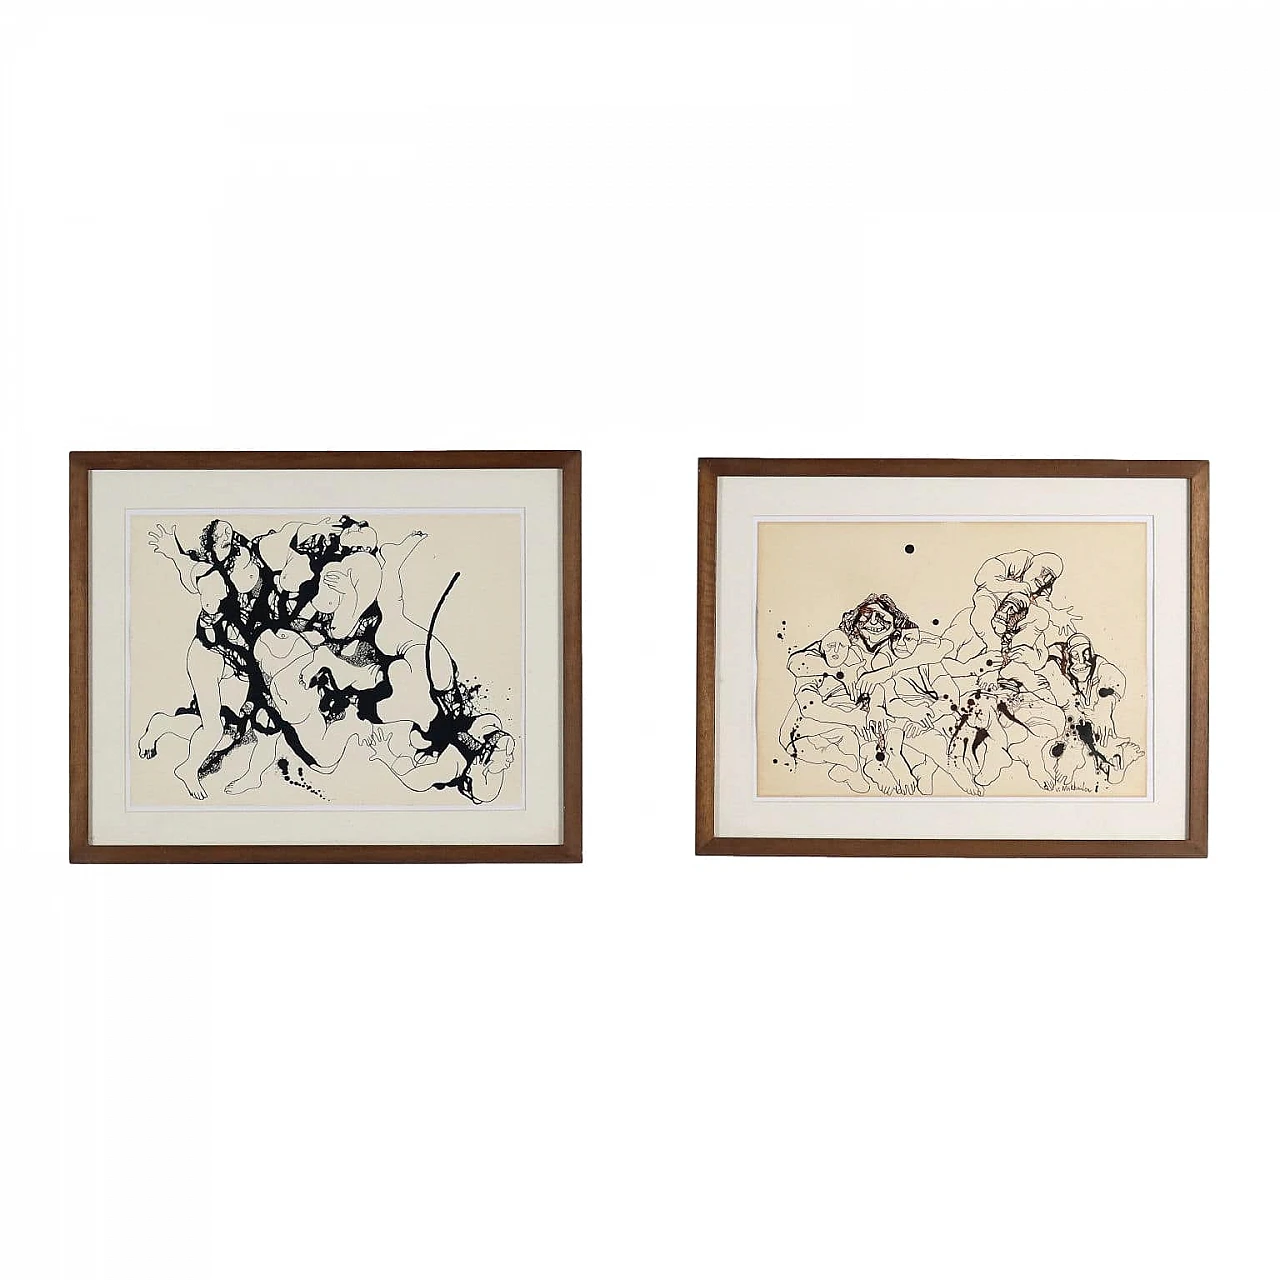 Vyacheslav Sawich Mikhailov, pair of drawings, ink on paper 1